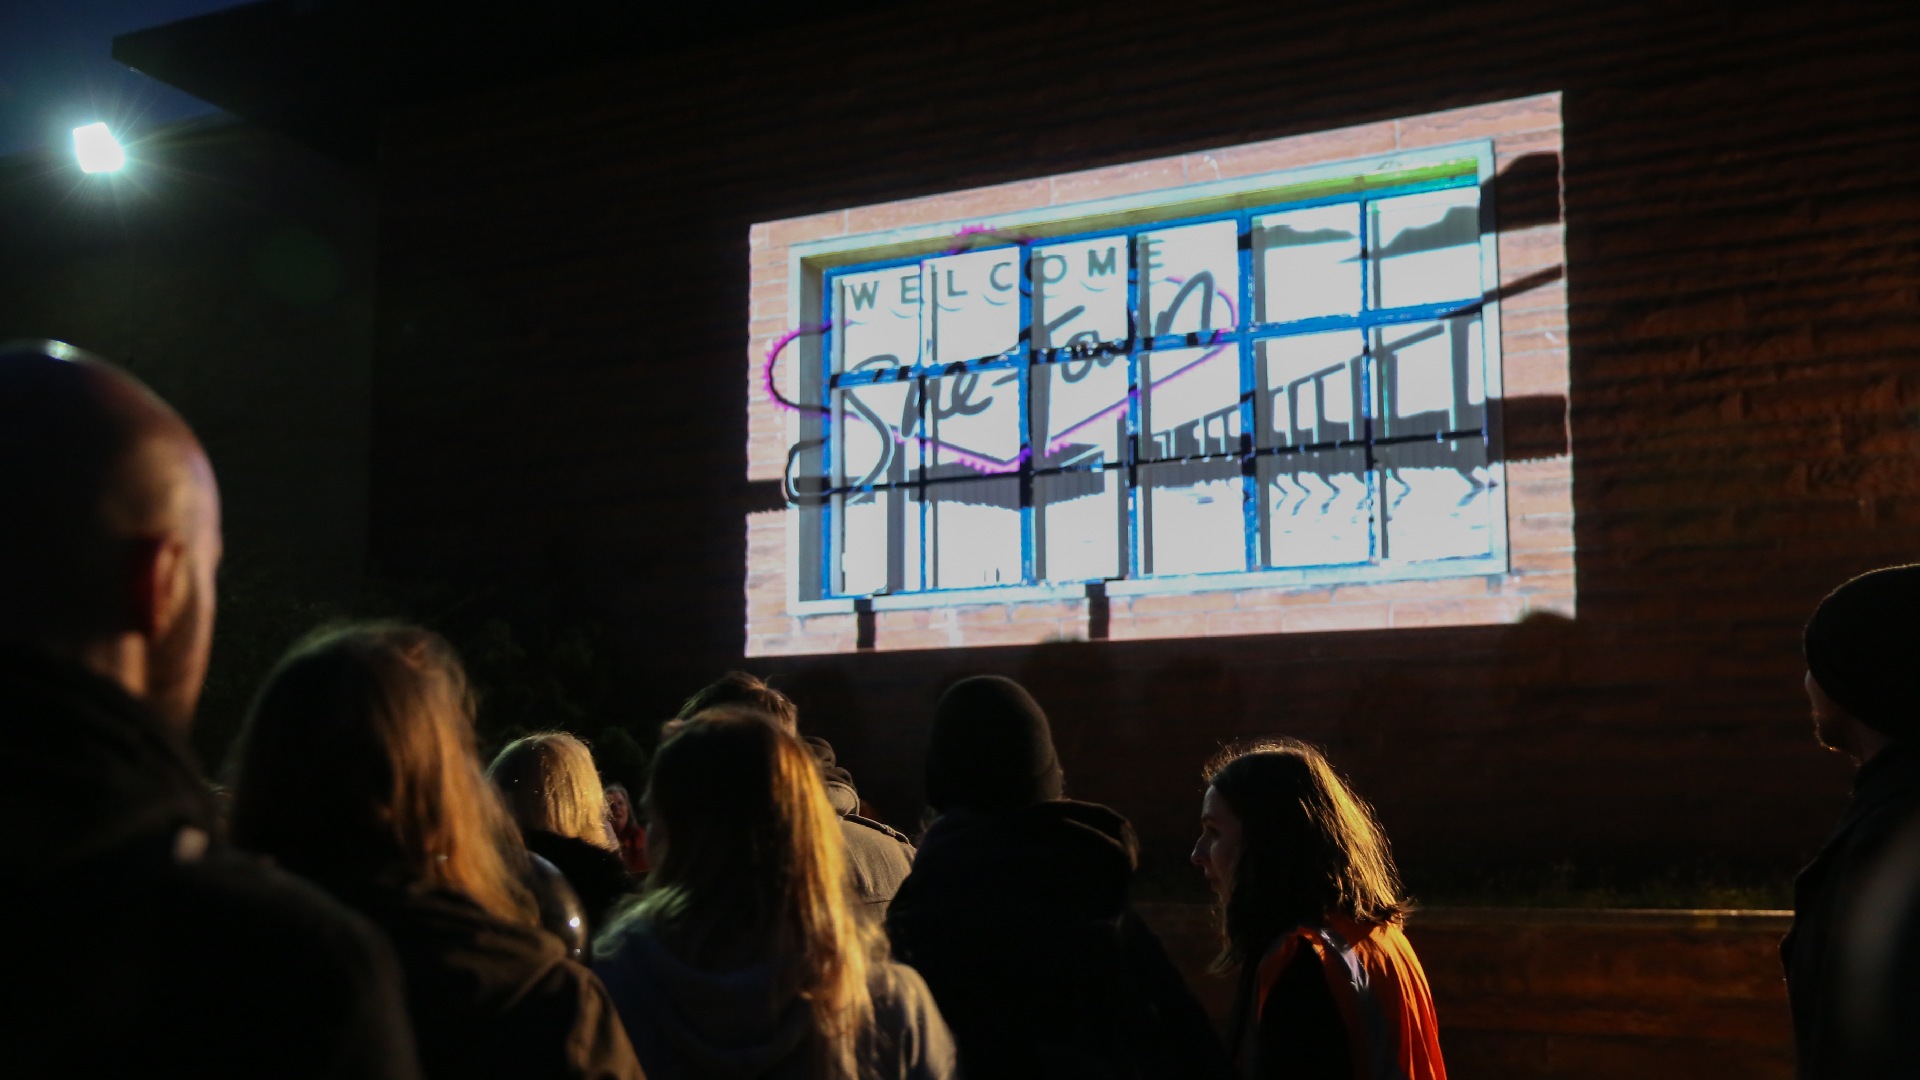 Photo of the event. The game is projected onto the large windows of the JCT factory, with the audience visible in the foreground.